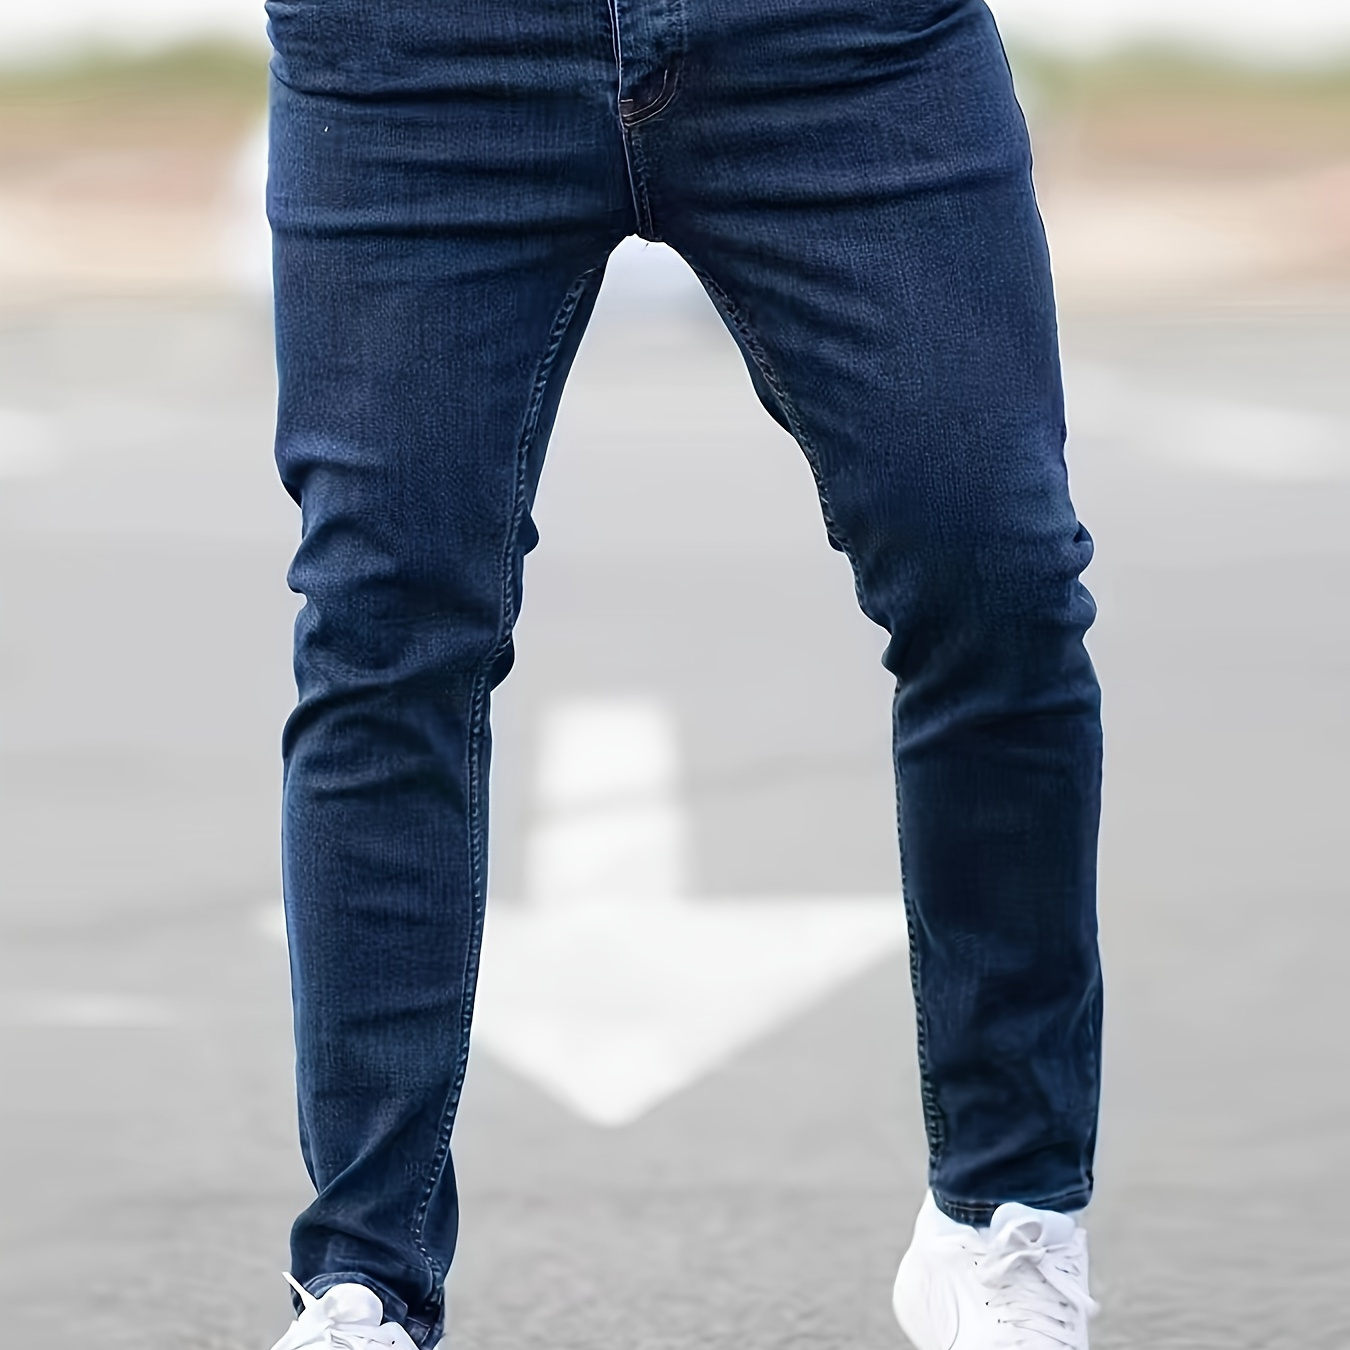 

Men's Solid Cotton Blend Slightly Stretch Jeans, Chic Street Style Slim Fit Bottoms For Men, All Seasons